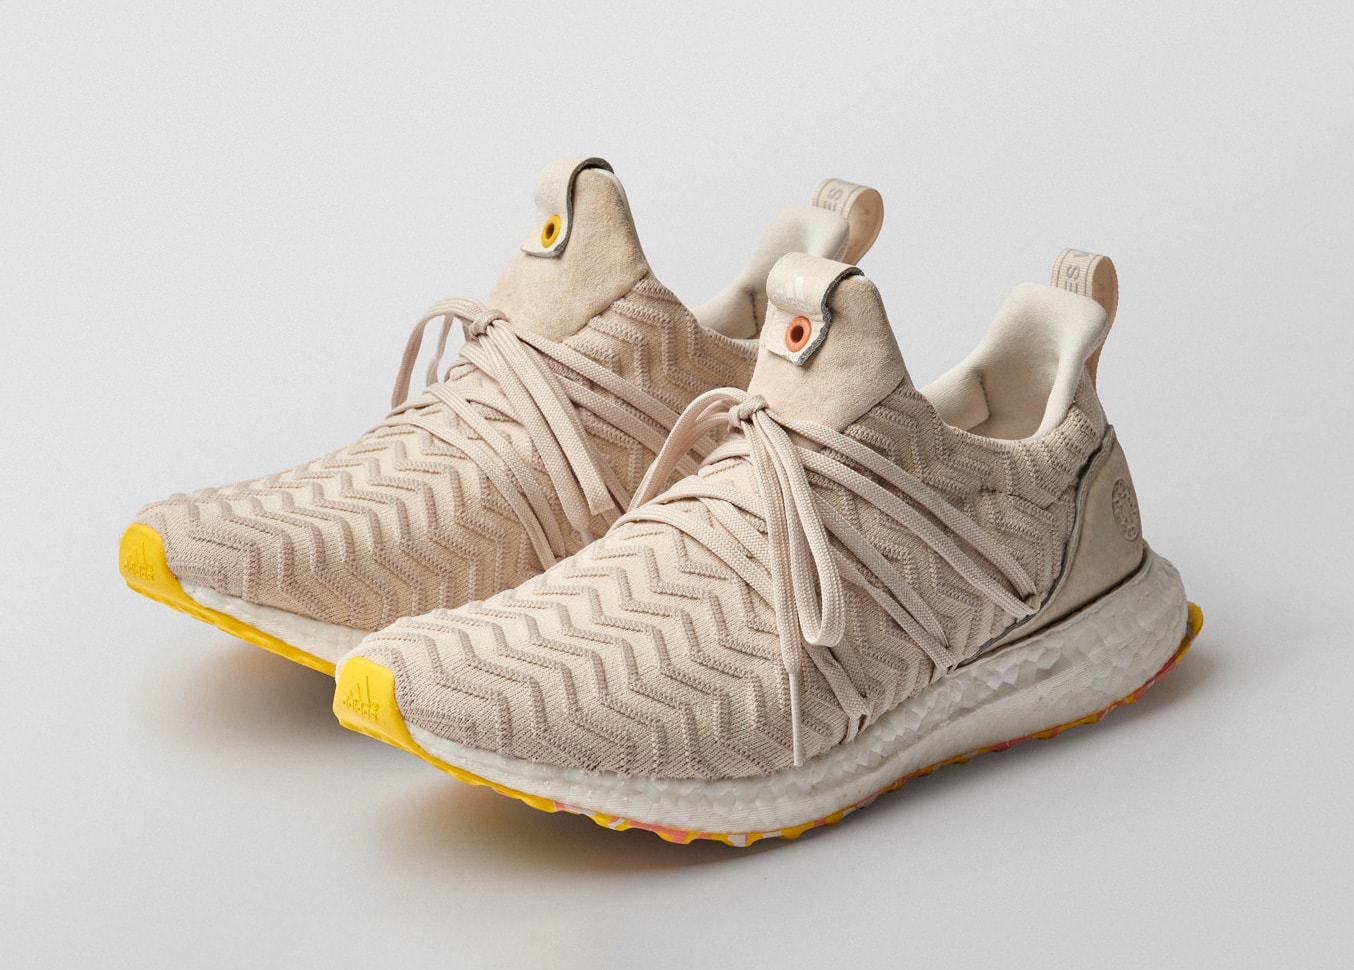 A Kind of Guise x adidas UltraBOOST Collective 2018 consortium release date sneaker collaboration